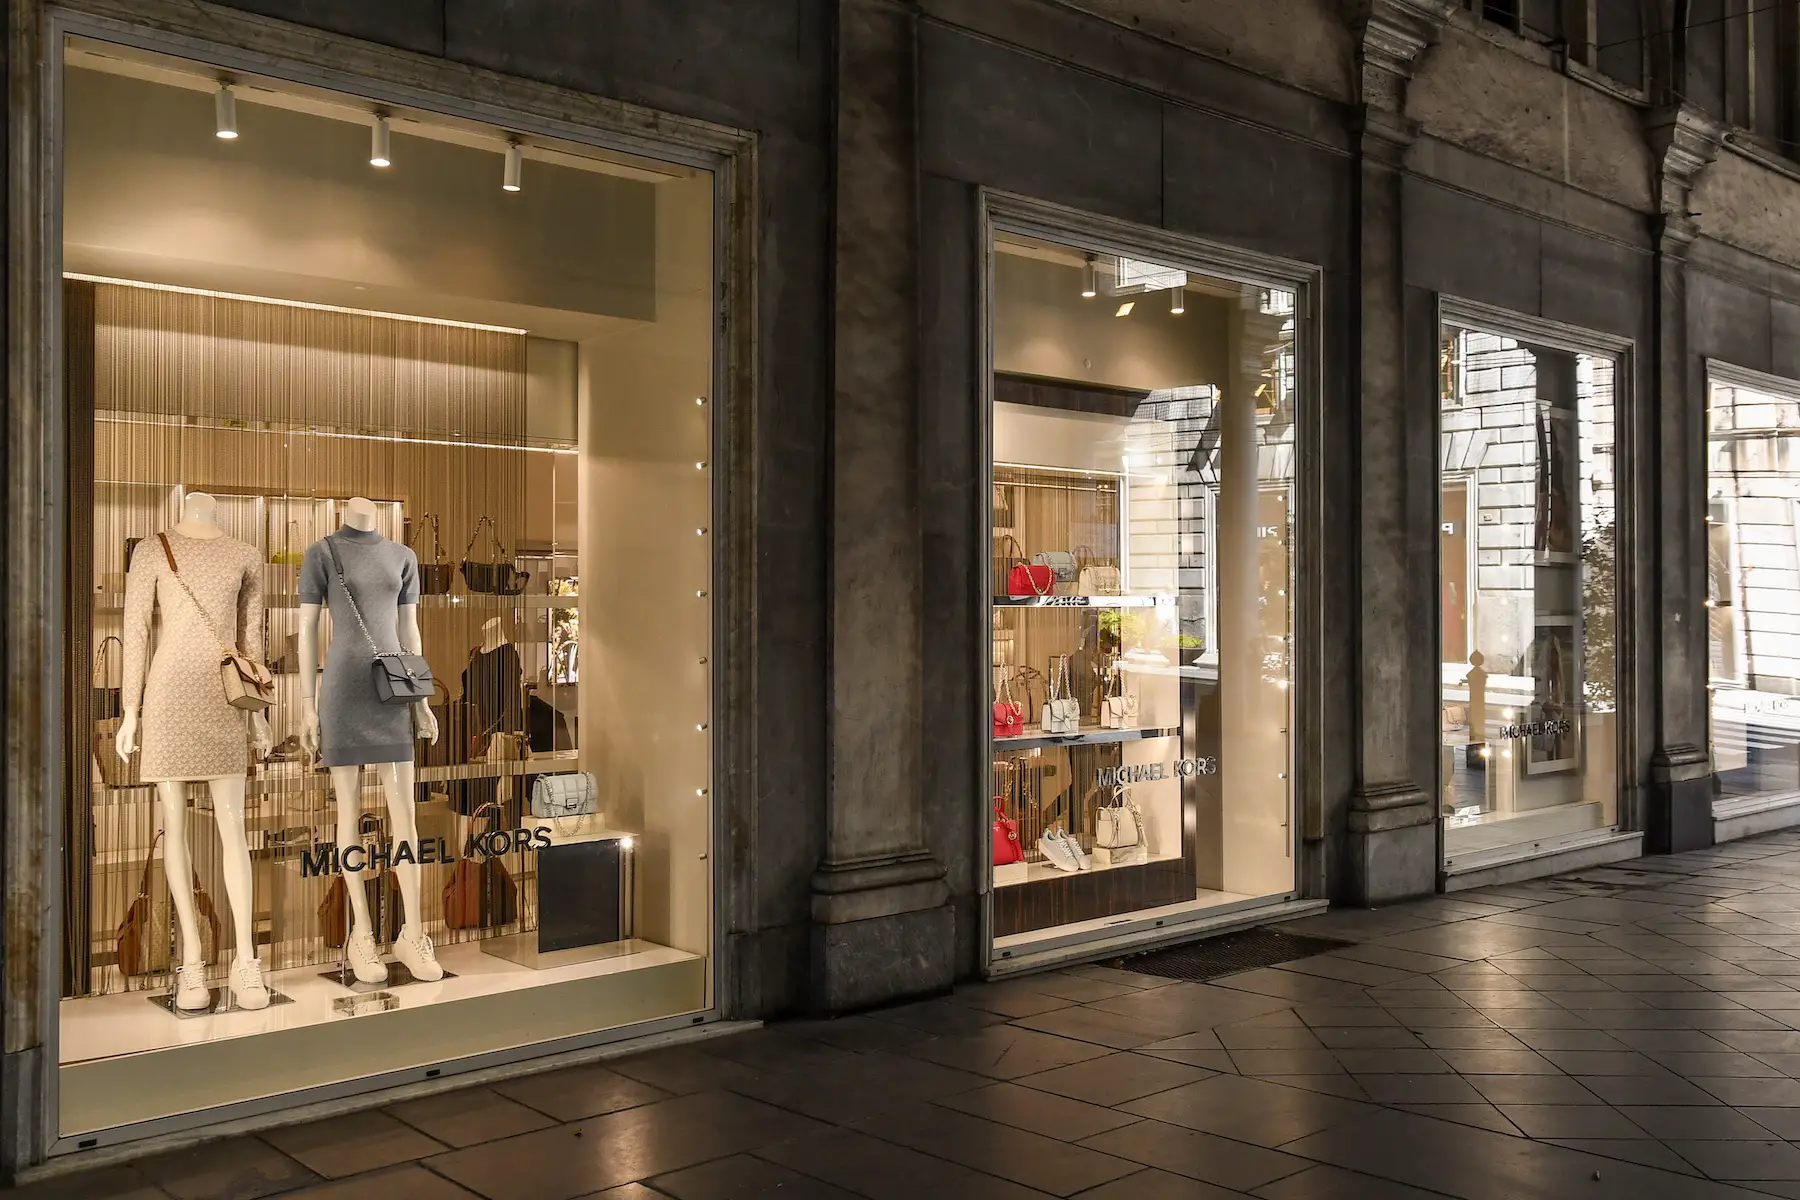 Purses and dresses on display in the windows of a Michael Kors store inside Galleria Giuseppe Mazzini shopping center, Genoa, Italy